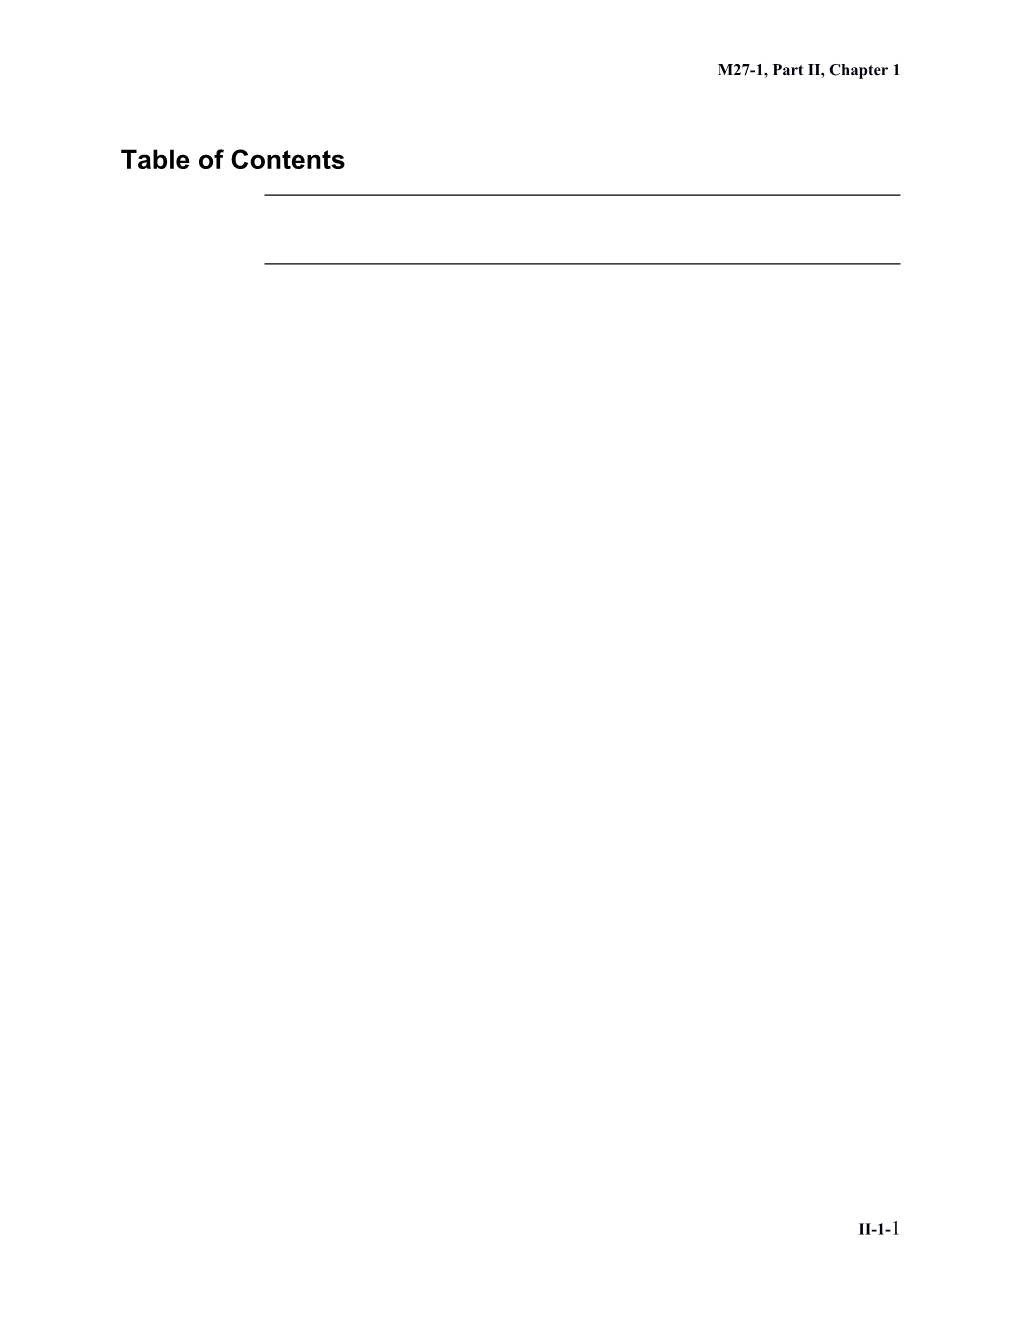 Table of Contents s534